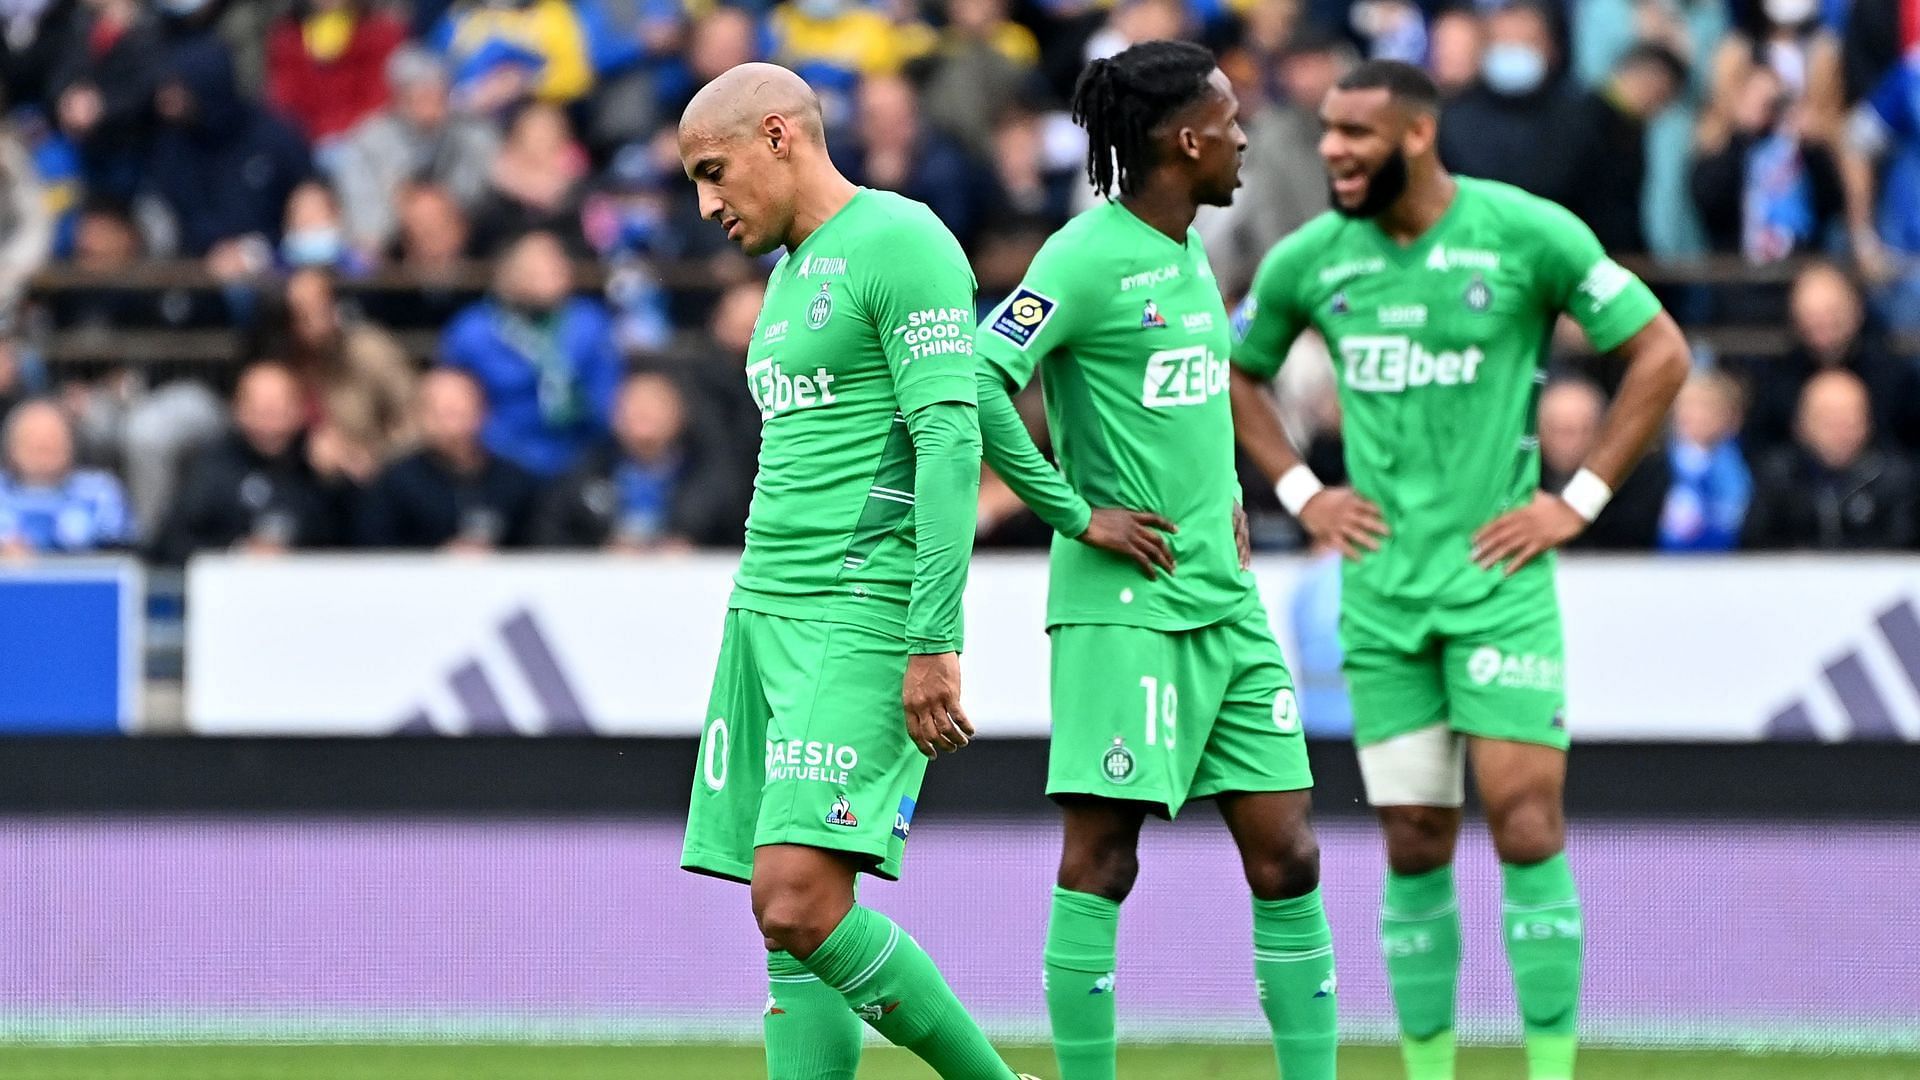 Saint-Etienne take on Bergerac in the upcoming Coupe de France fixture on Sunday